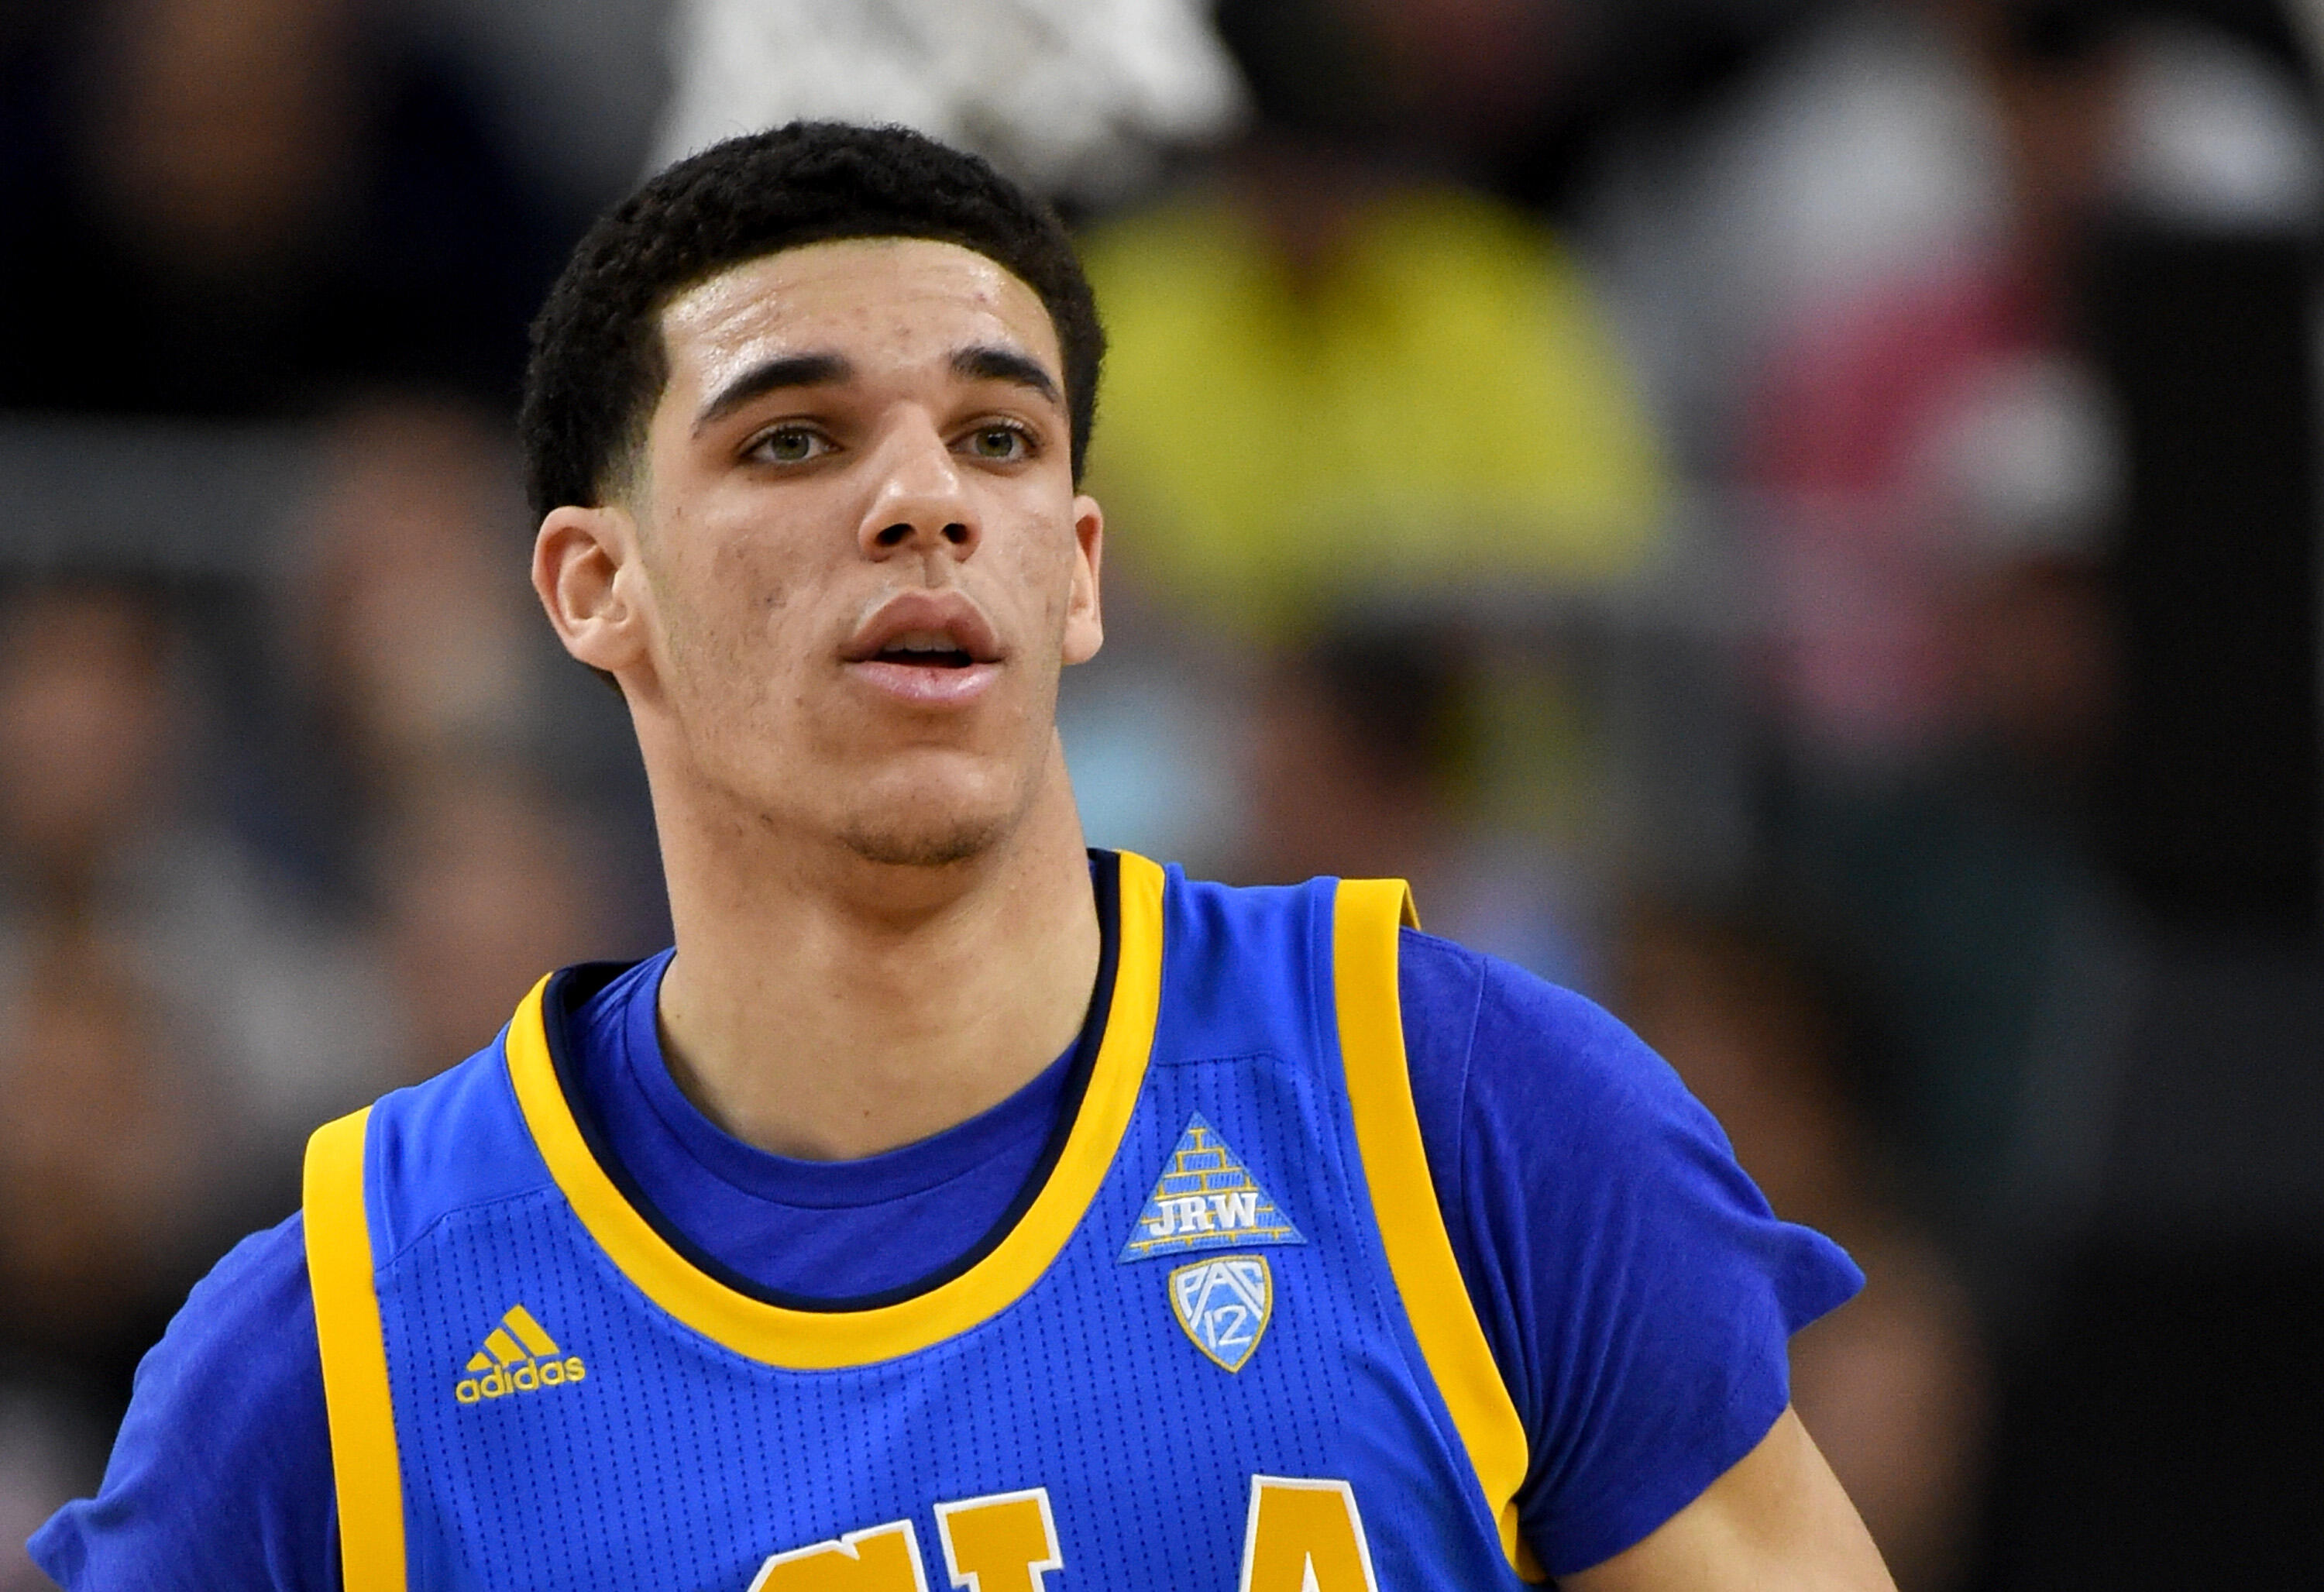 LAS VEGAS, NV - MARCH 10:  Lonzo Ball #2 of the UCLA Bruins runs on the court during a semifinal game of the Pac-12 Basketball Tournament against the Arizona Wildcats at T-Mobile Arena on March 10, 2017 in Las Vegas, Nevada. Arizona won 86-75.  (Photo by 